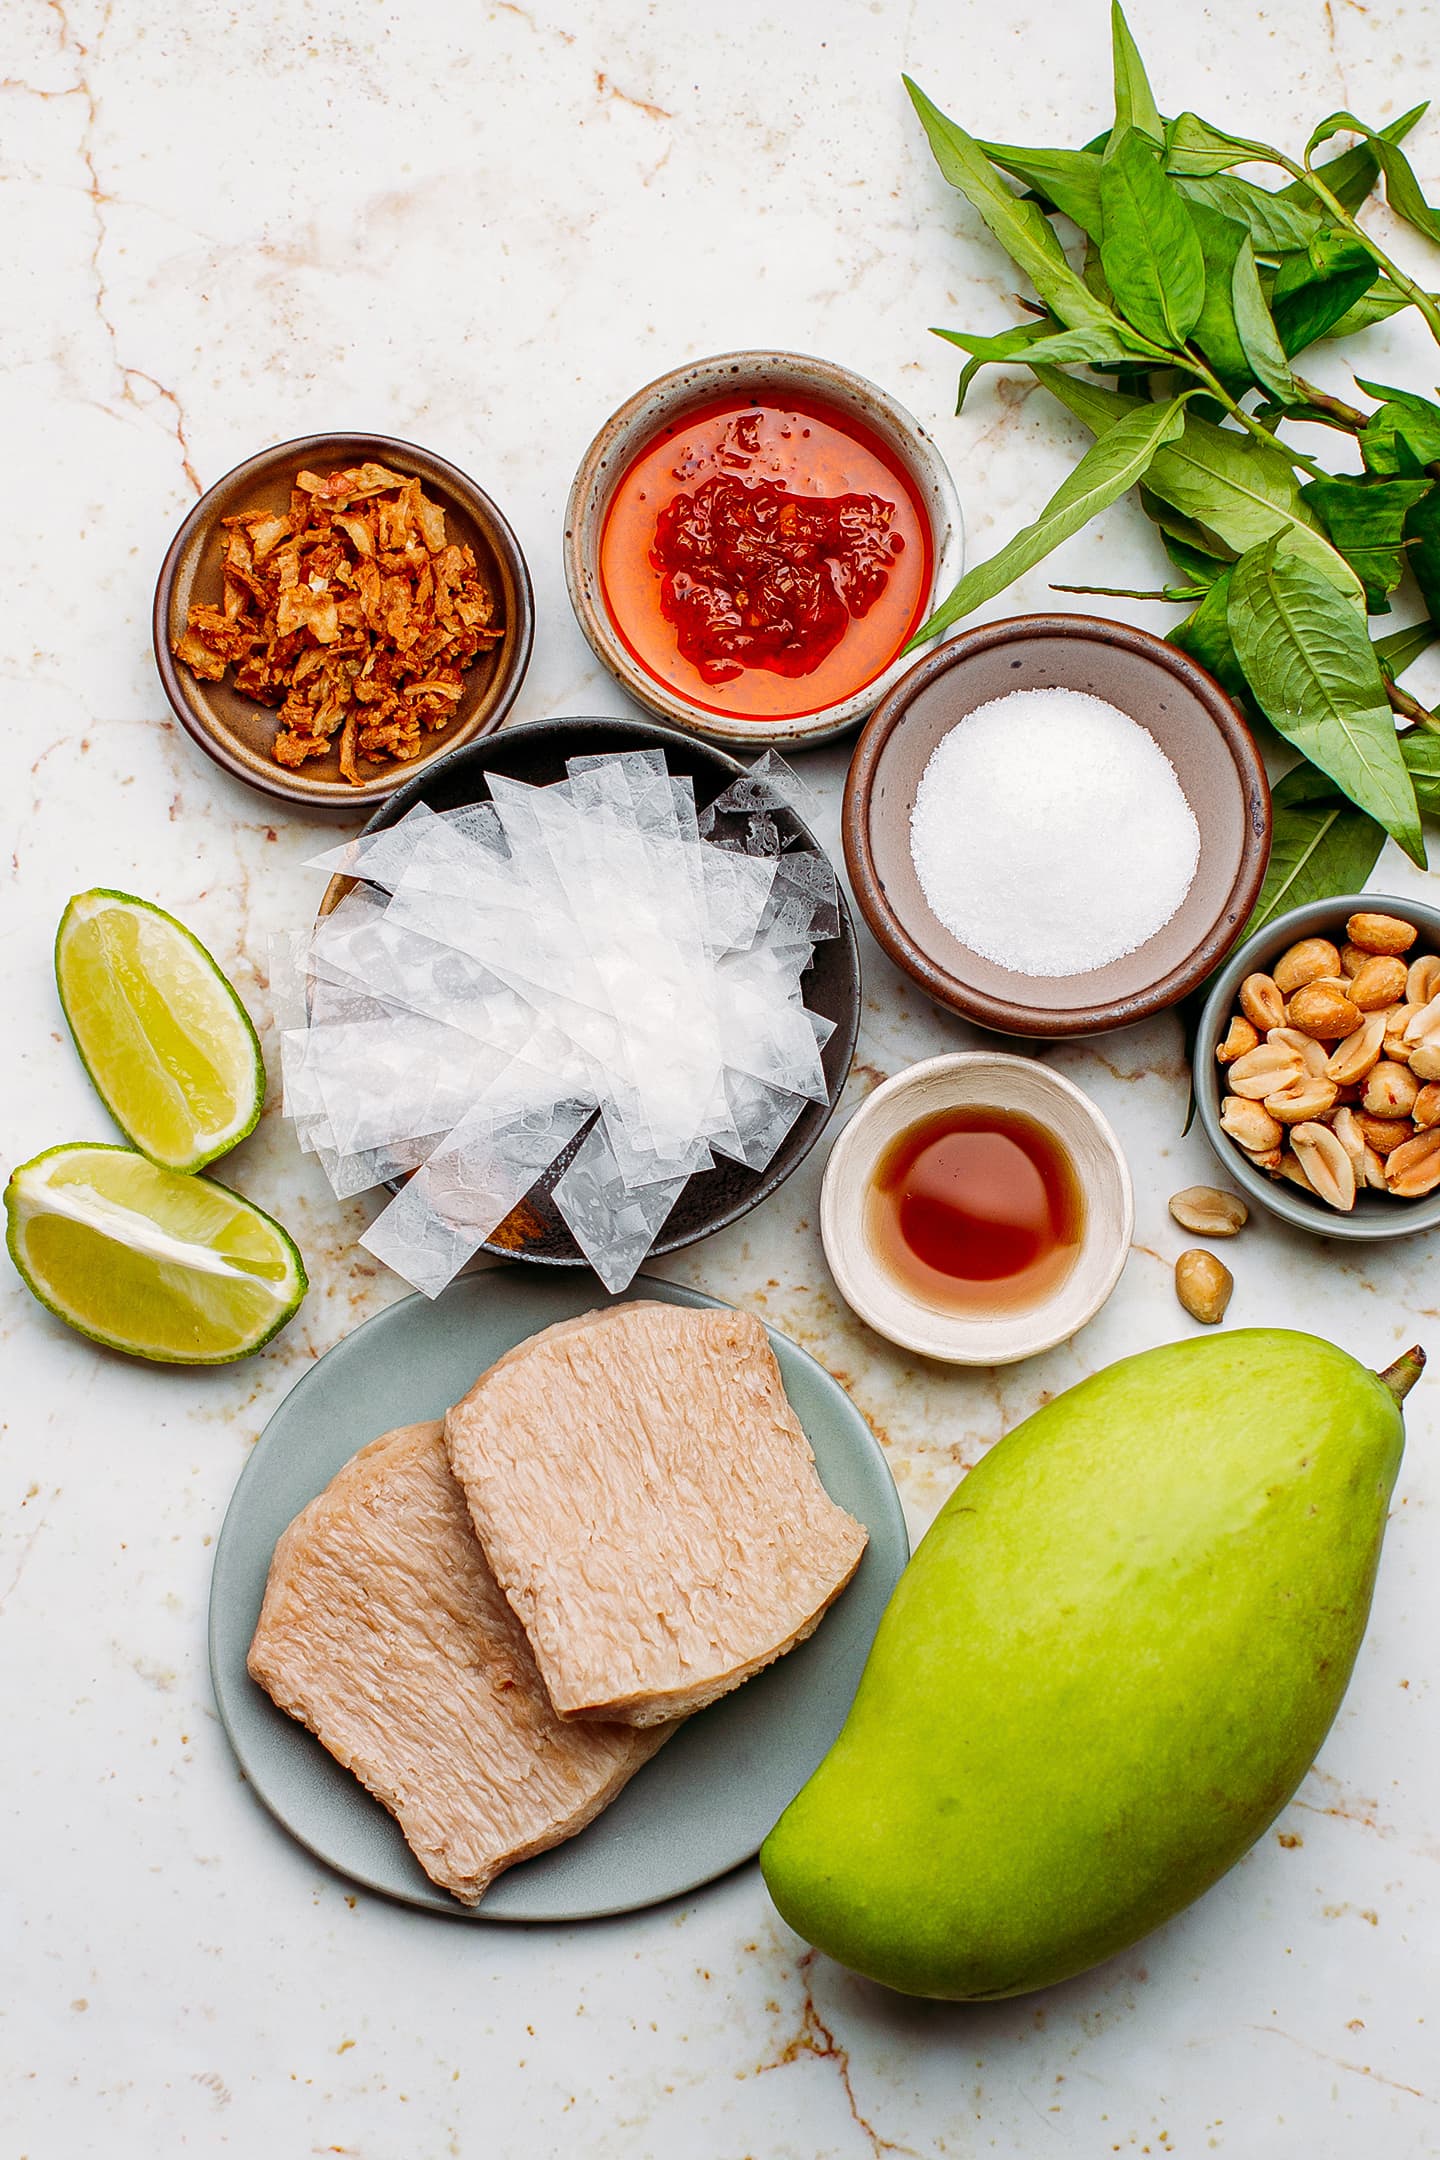 Ingredients like rice paper, green mango, lime, peanuts, and fried shallots.